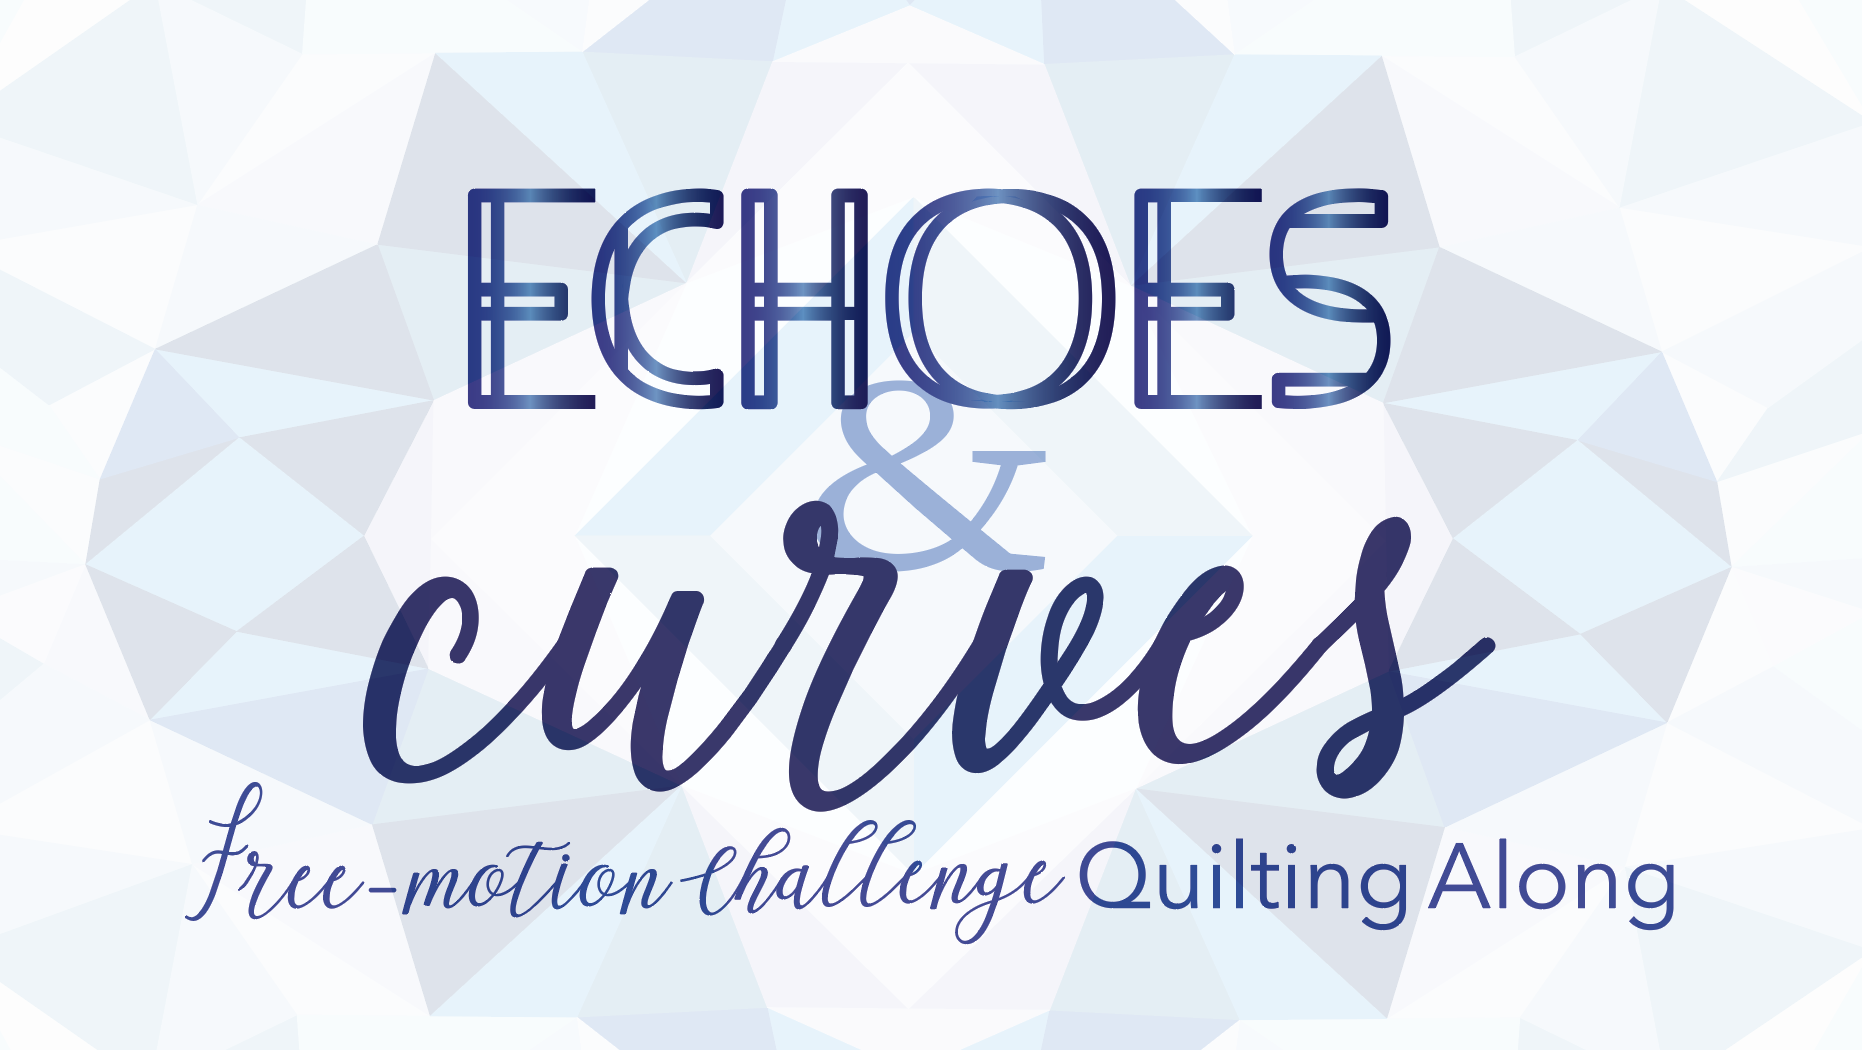 echoes and curves free-motion challenge quilting along